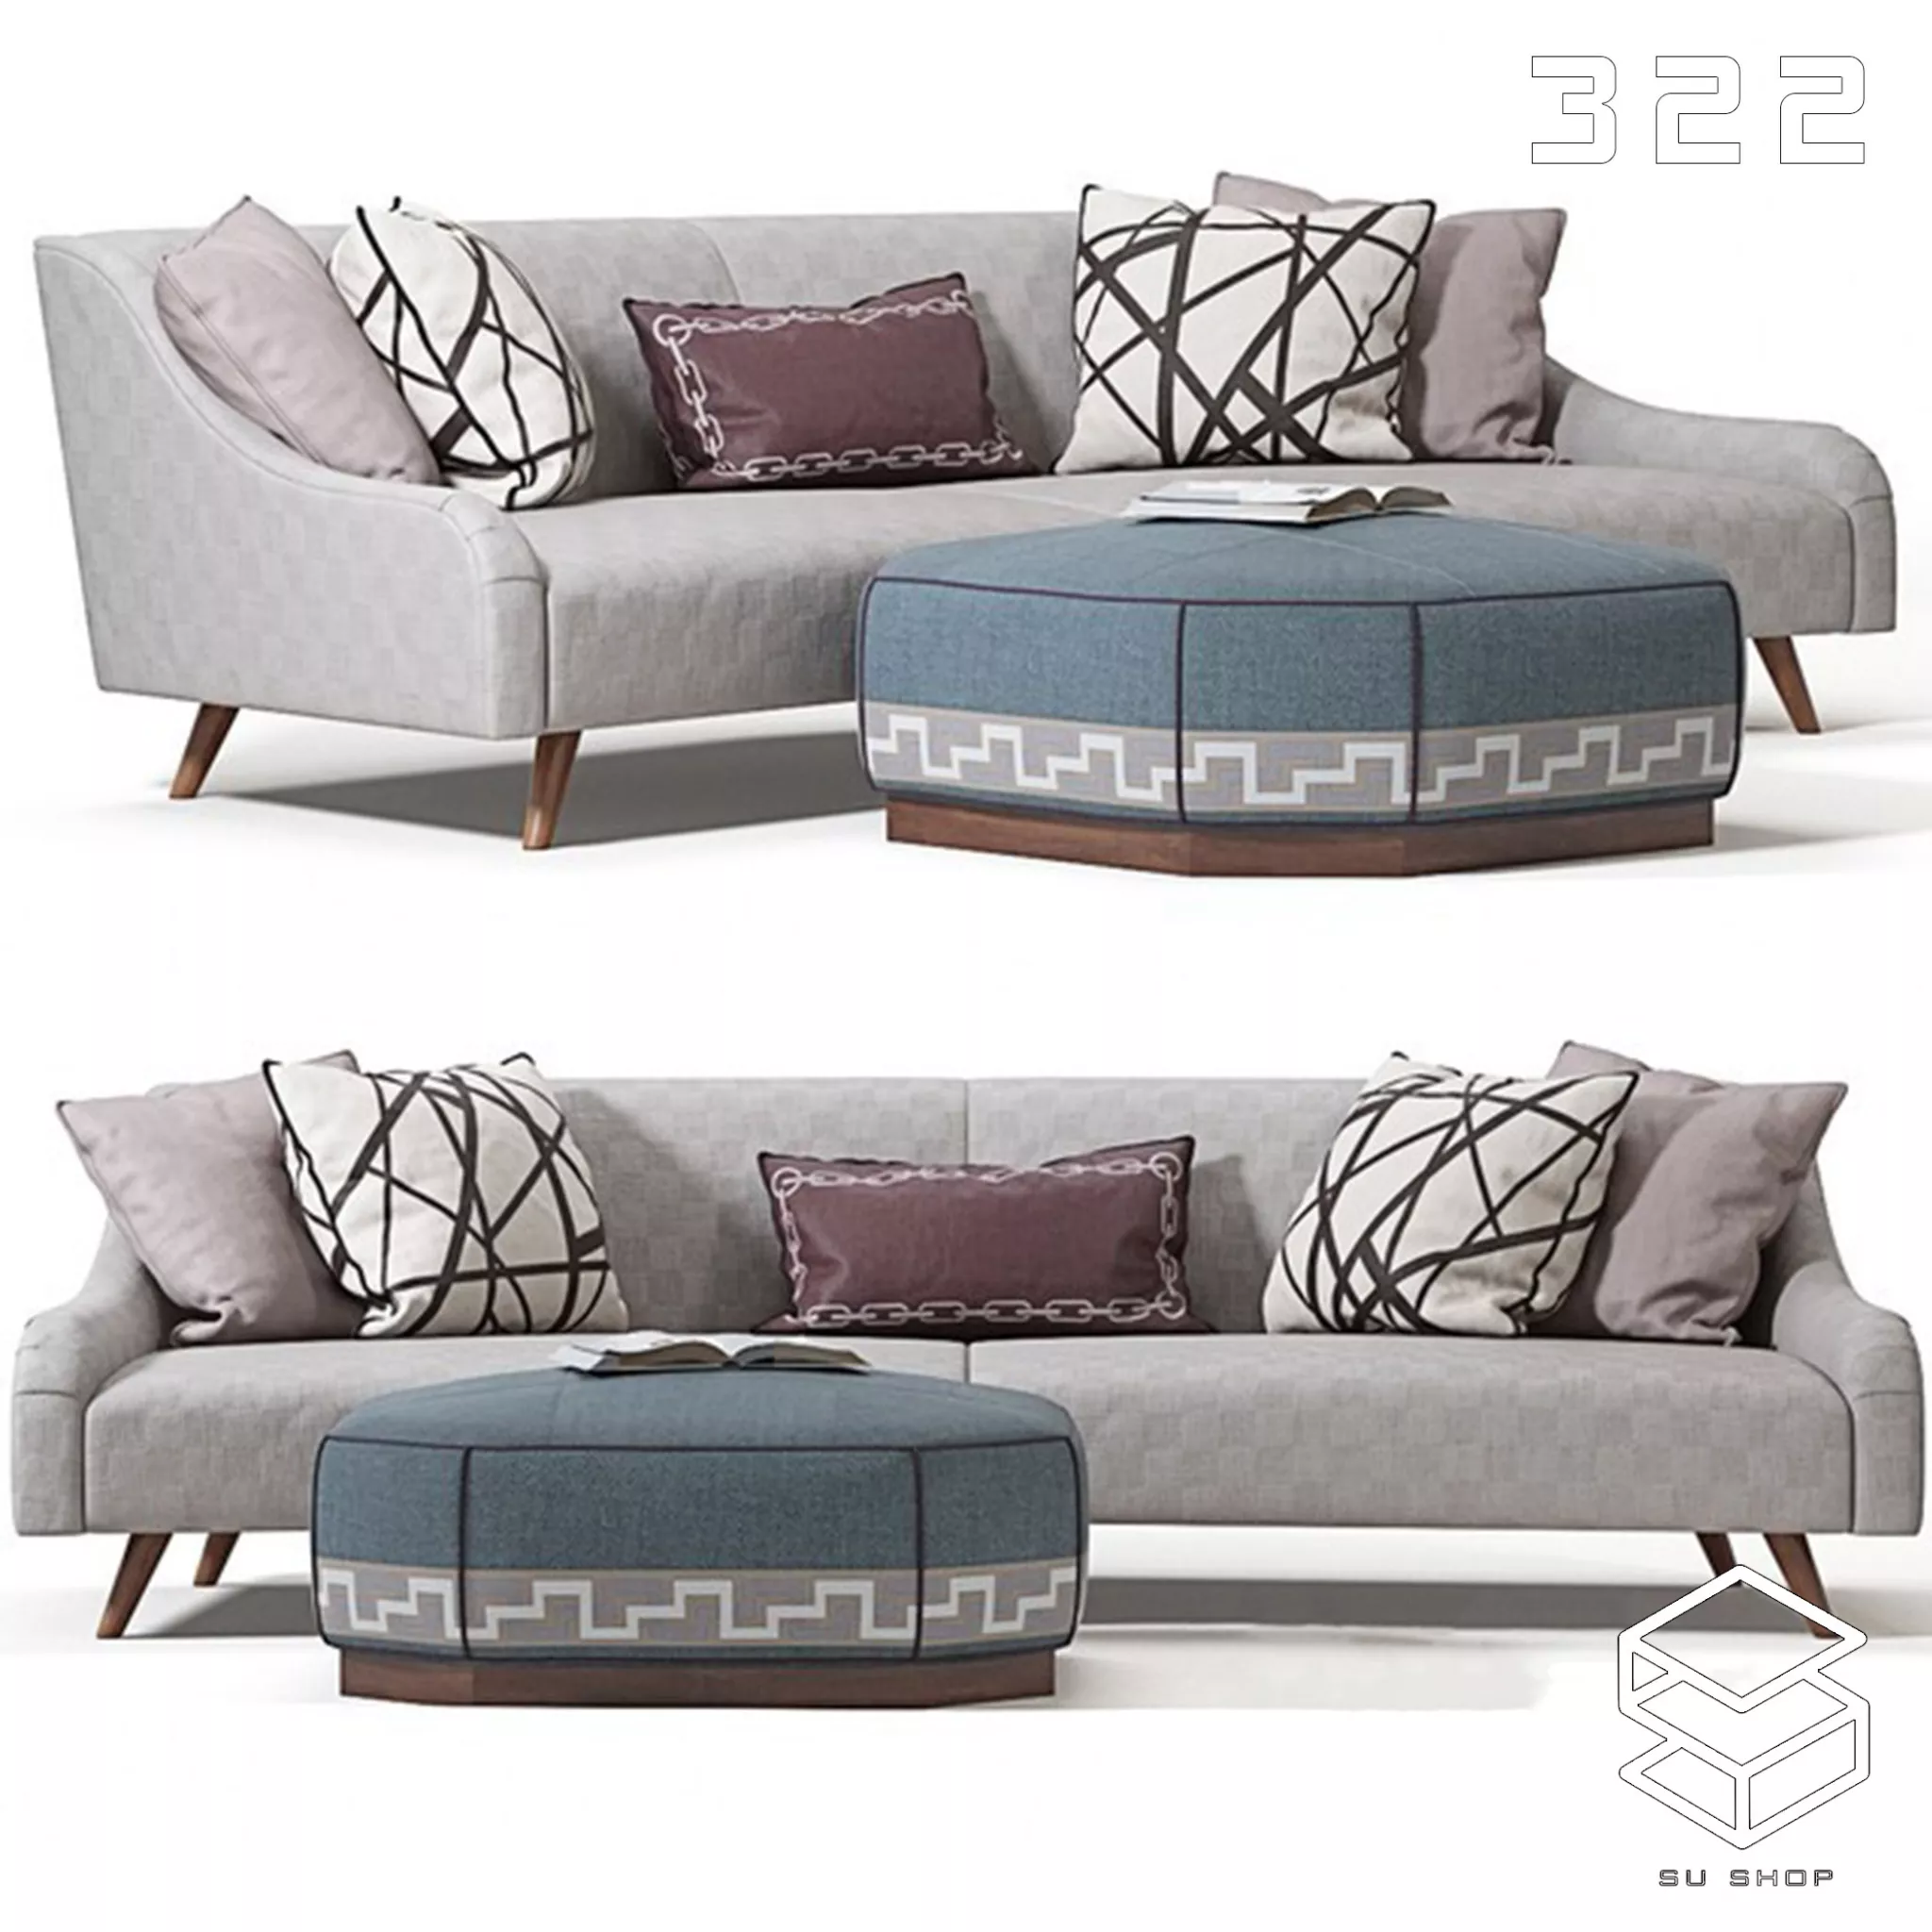 MODERN SOFA - SKETCHUP 3D MODEL - VRAY OR ENSCAPE - ID13633